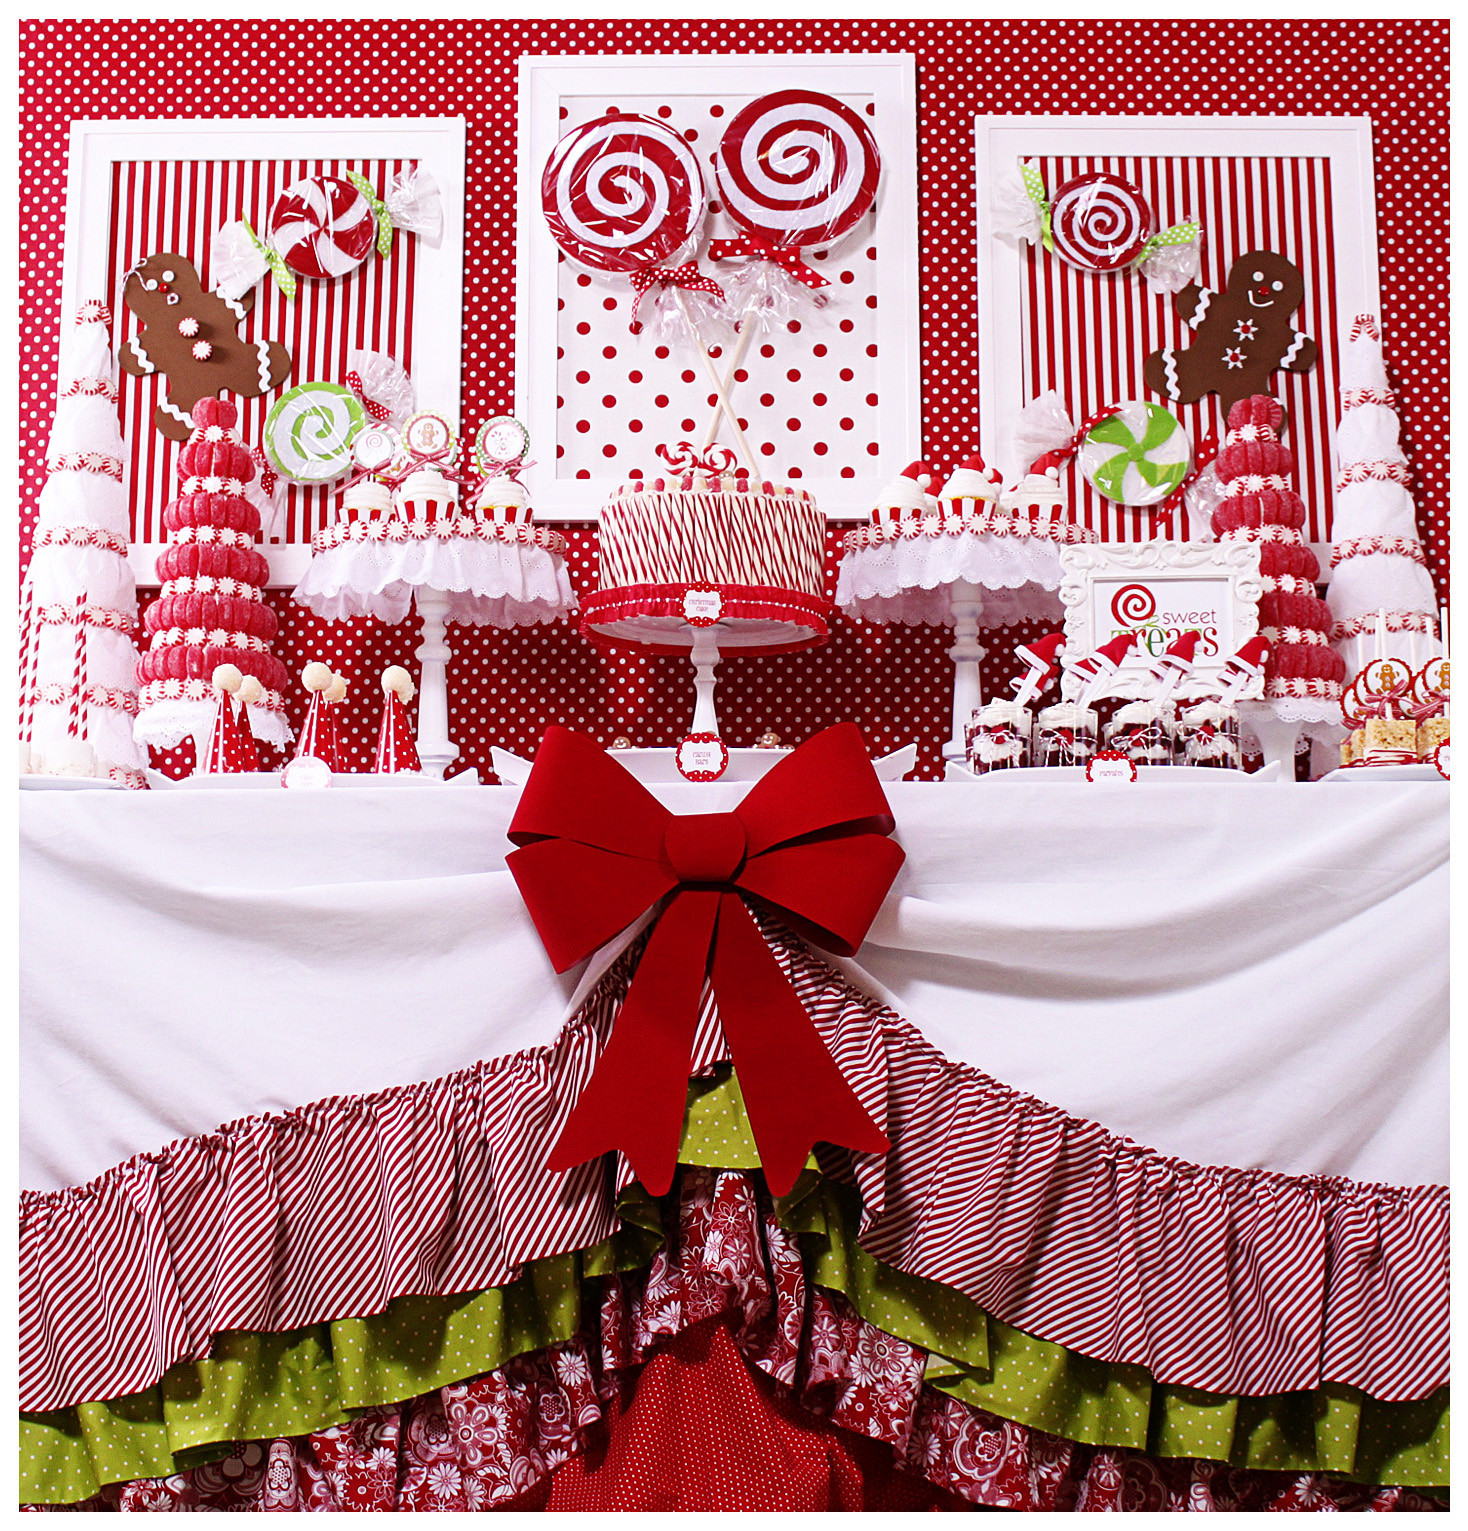 Fun Ideas For Holiday Party
 Kara s Party Ideas Candy Land Christmas Party